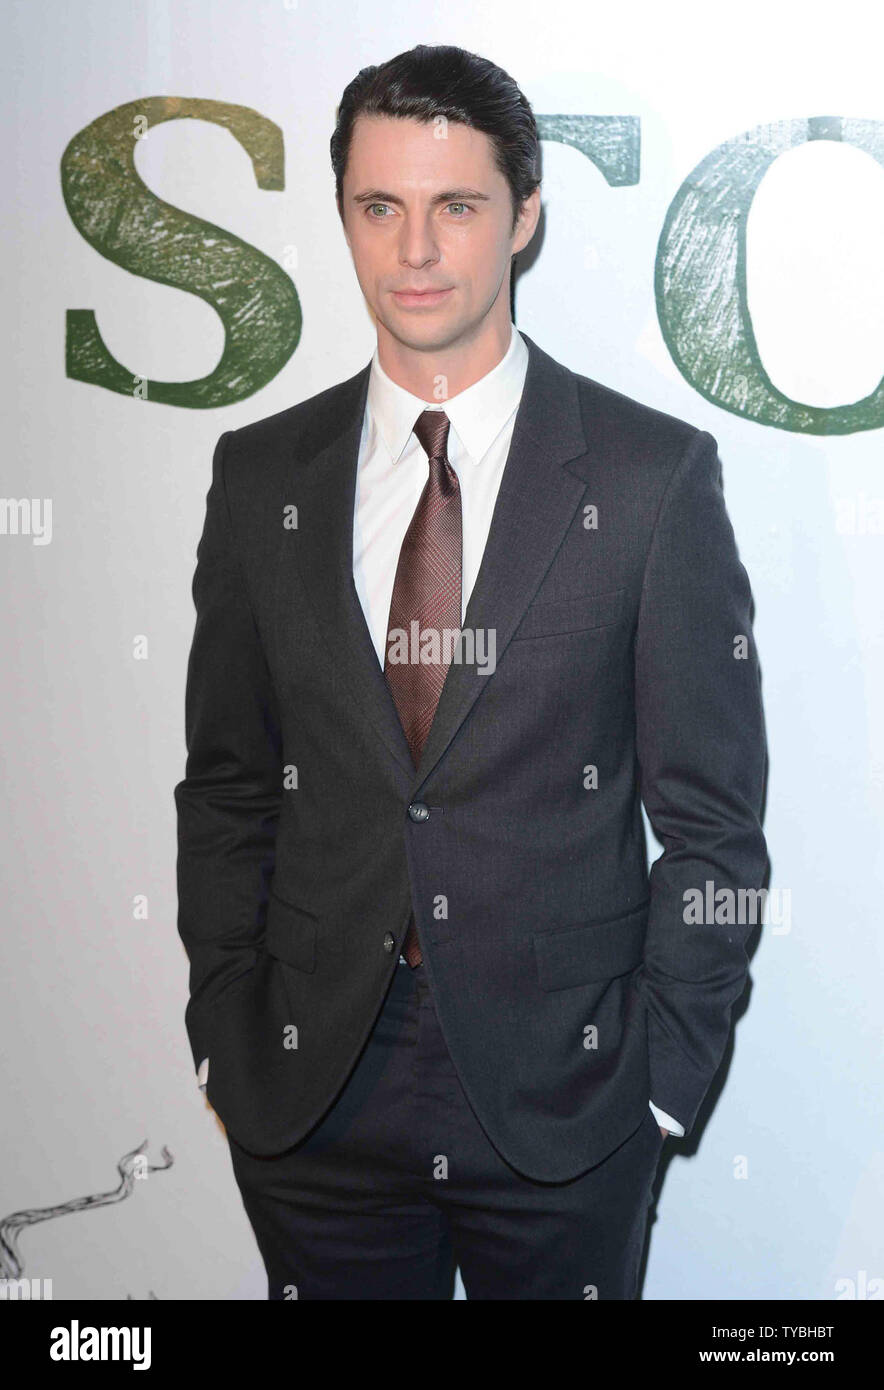 English actor Matthew Goode attends a special screening of 'Stoker' at The Curzon Soho in London on February 17, 2013.     UPI/Paul Treadway Stock Photo